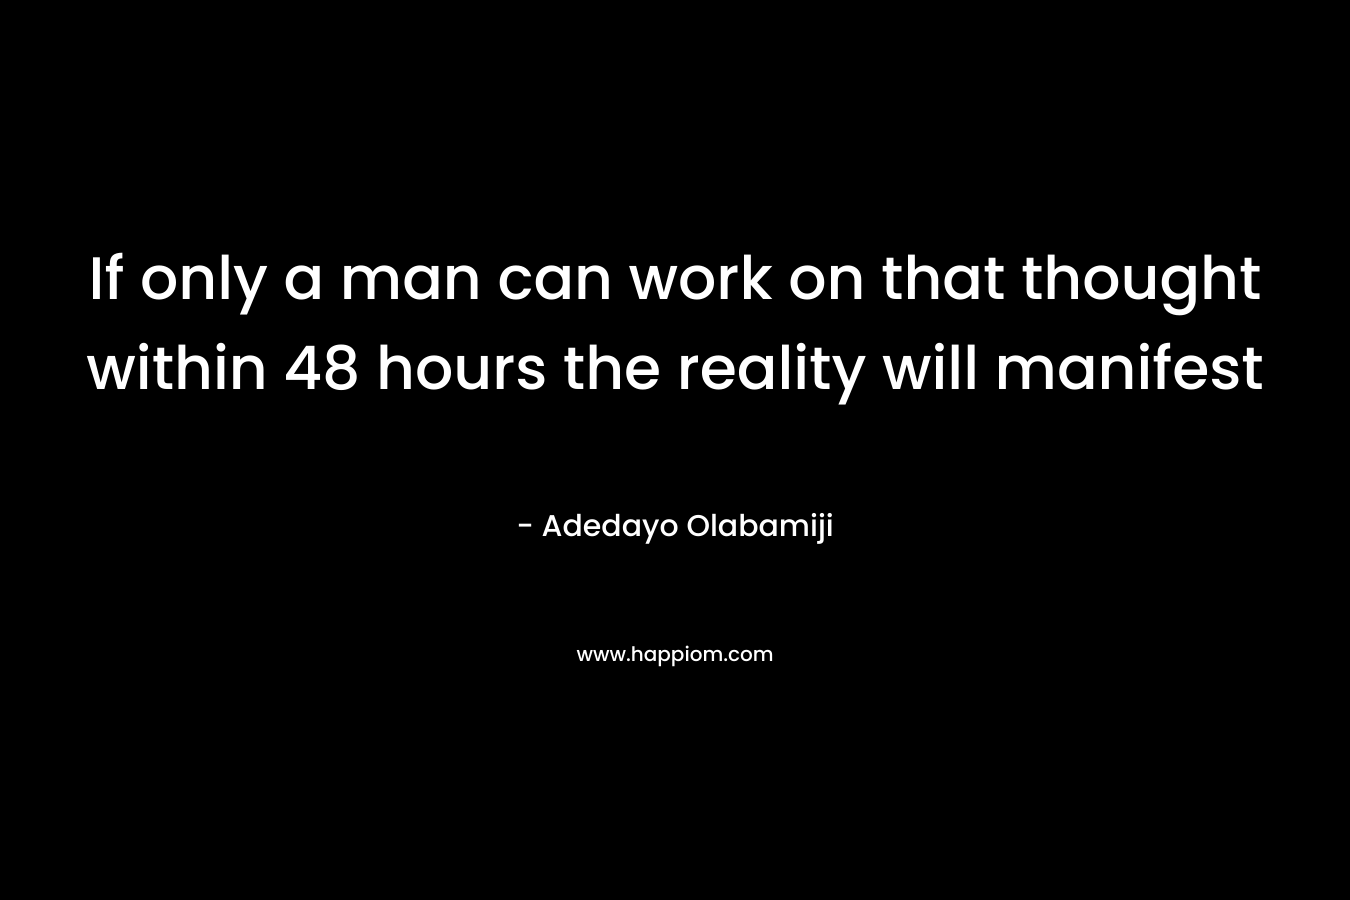 If only a man can work on that thought within 48 hours the reality will manifest